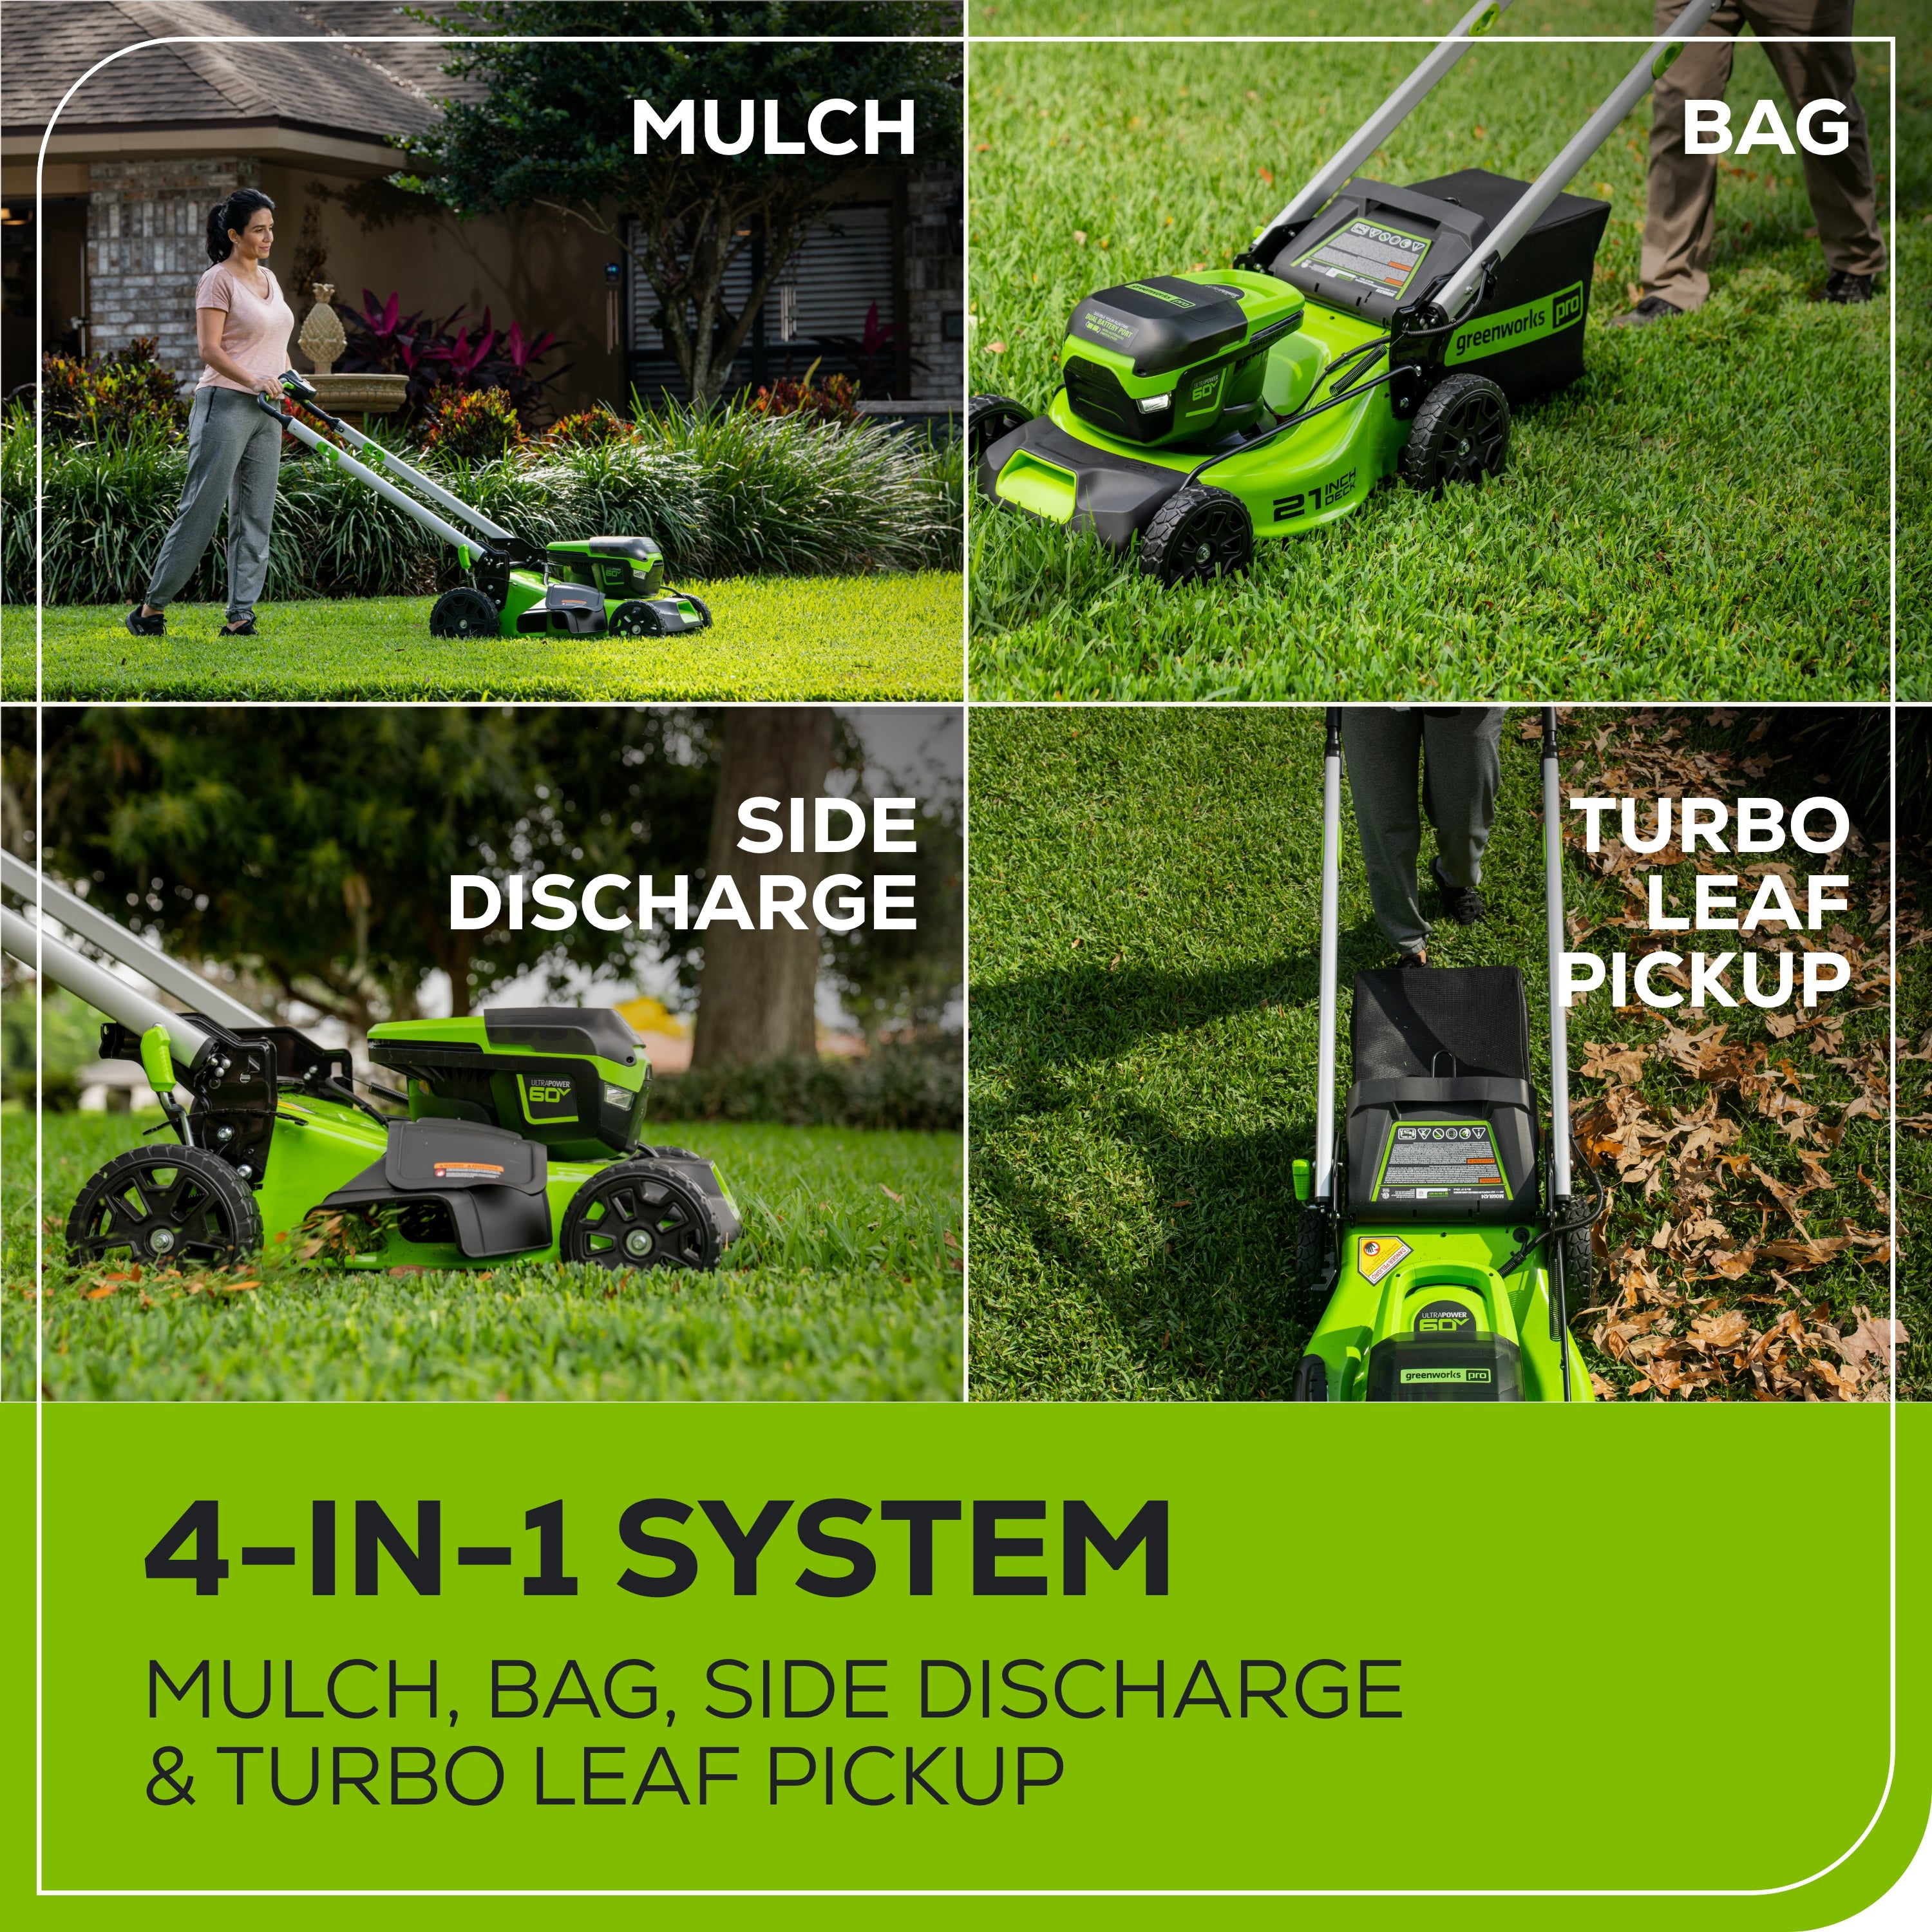 POWERWORKS 60V 21 Inch Cordless Lawn Mower Brushless Motor with